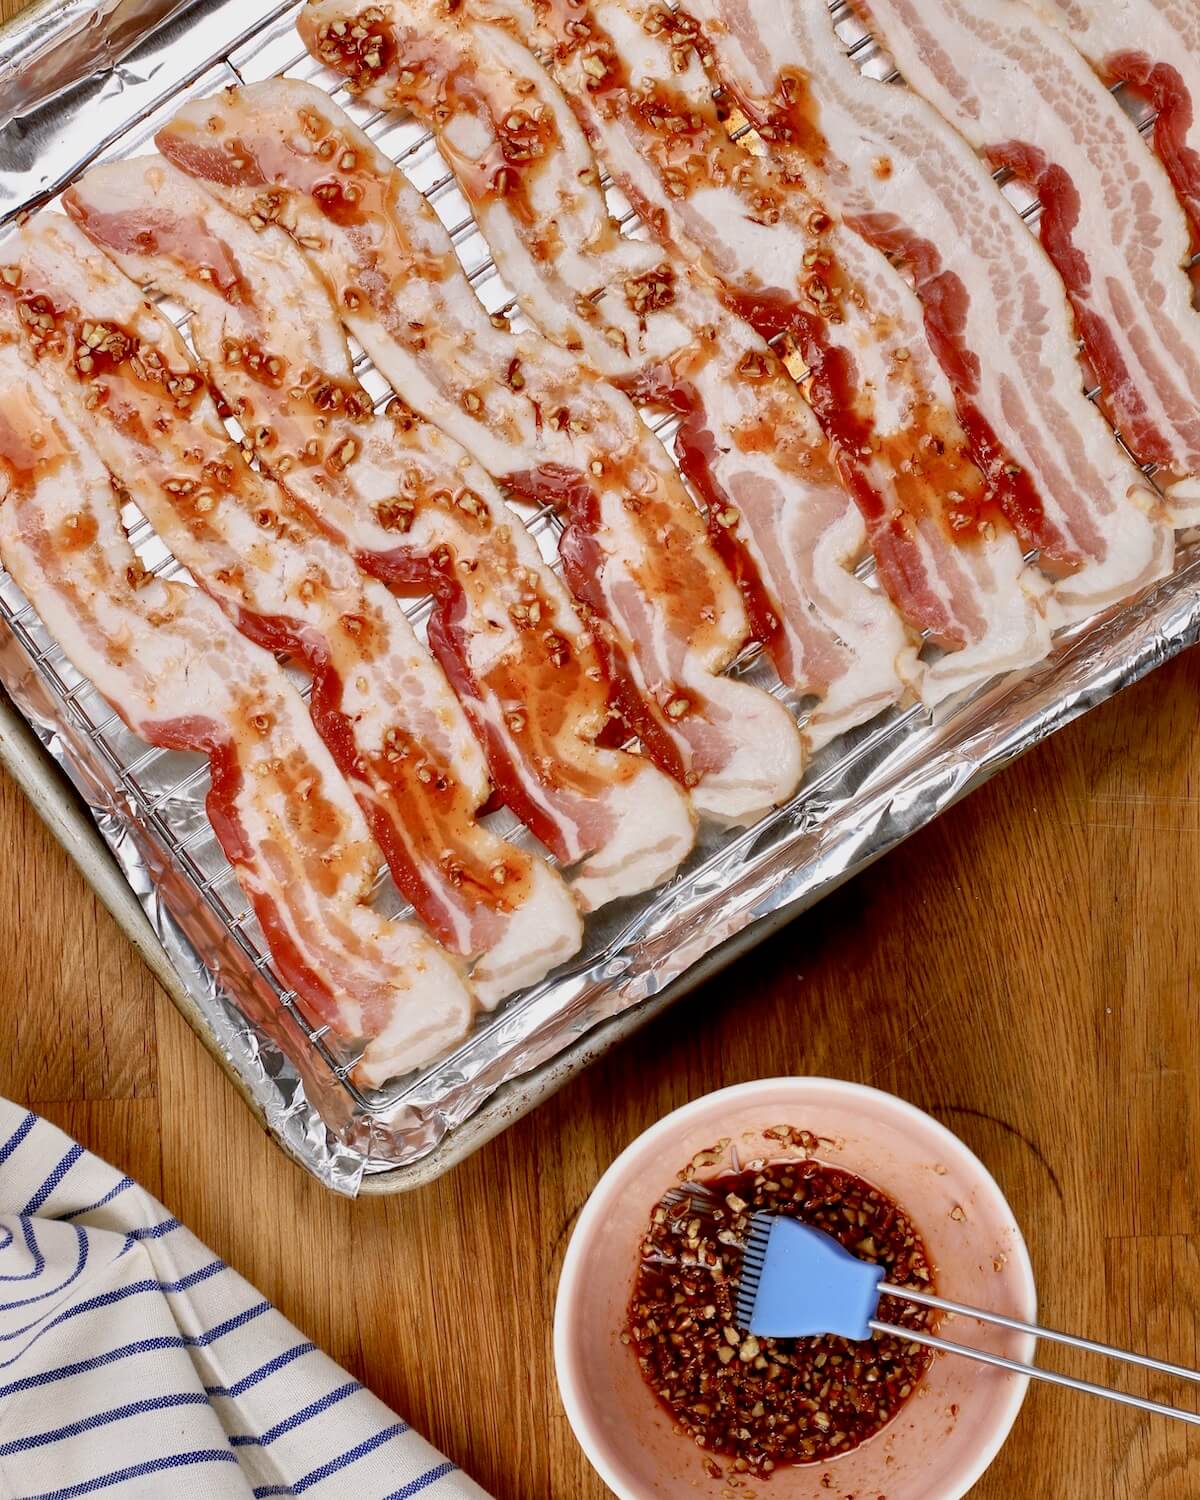 brushing maple sauce on raw bacon for the oven